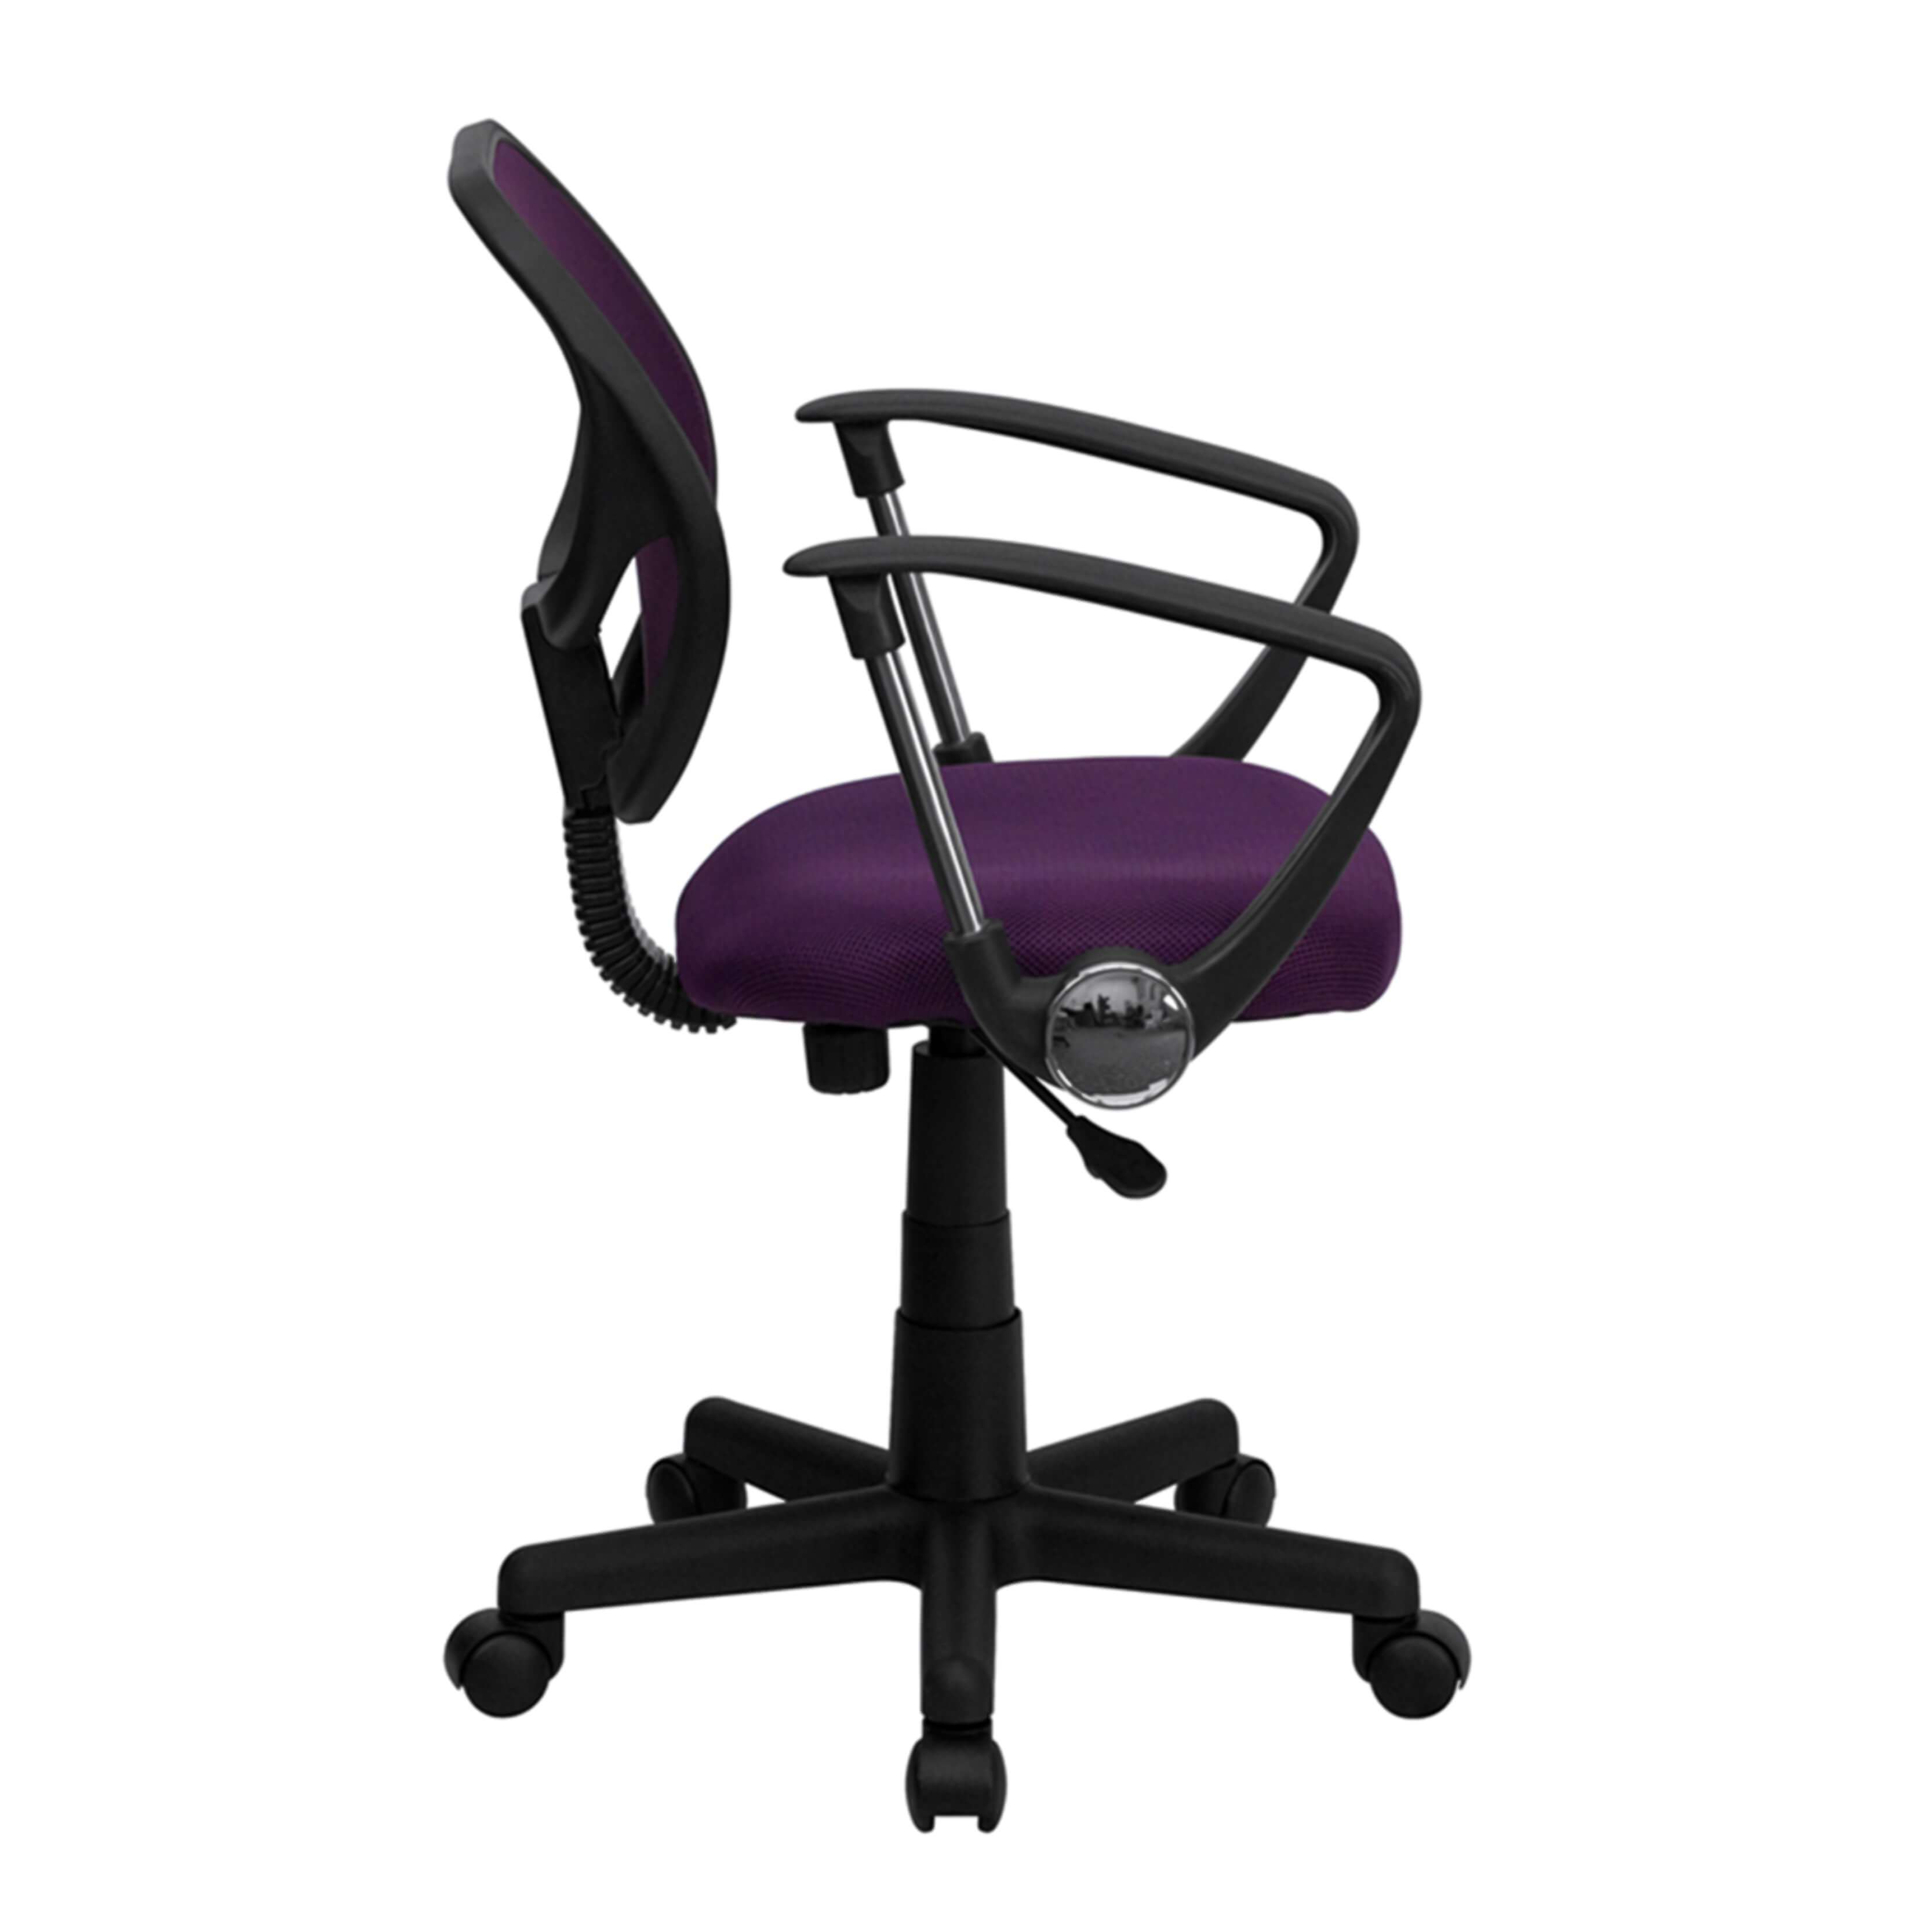 Petite office chairs side view